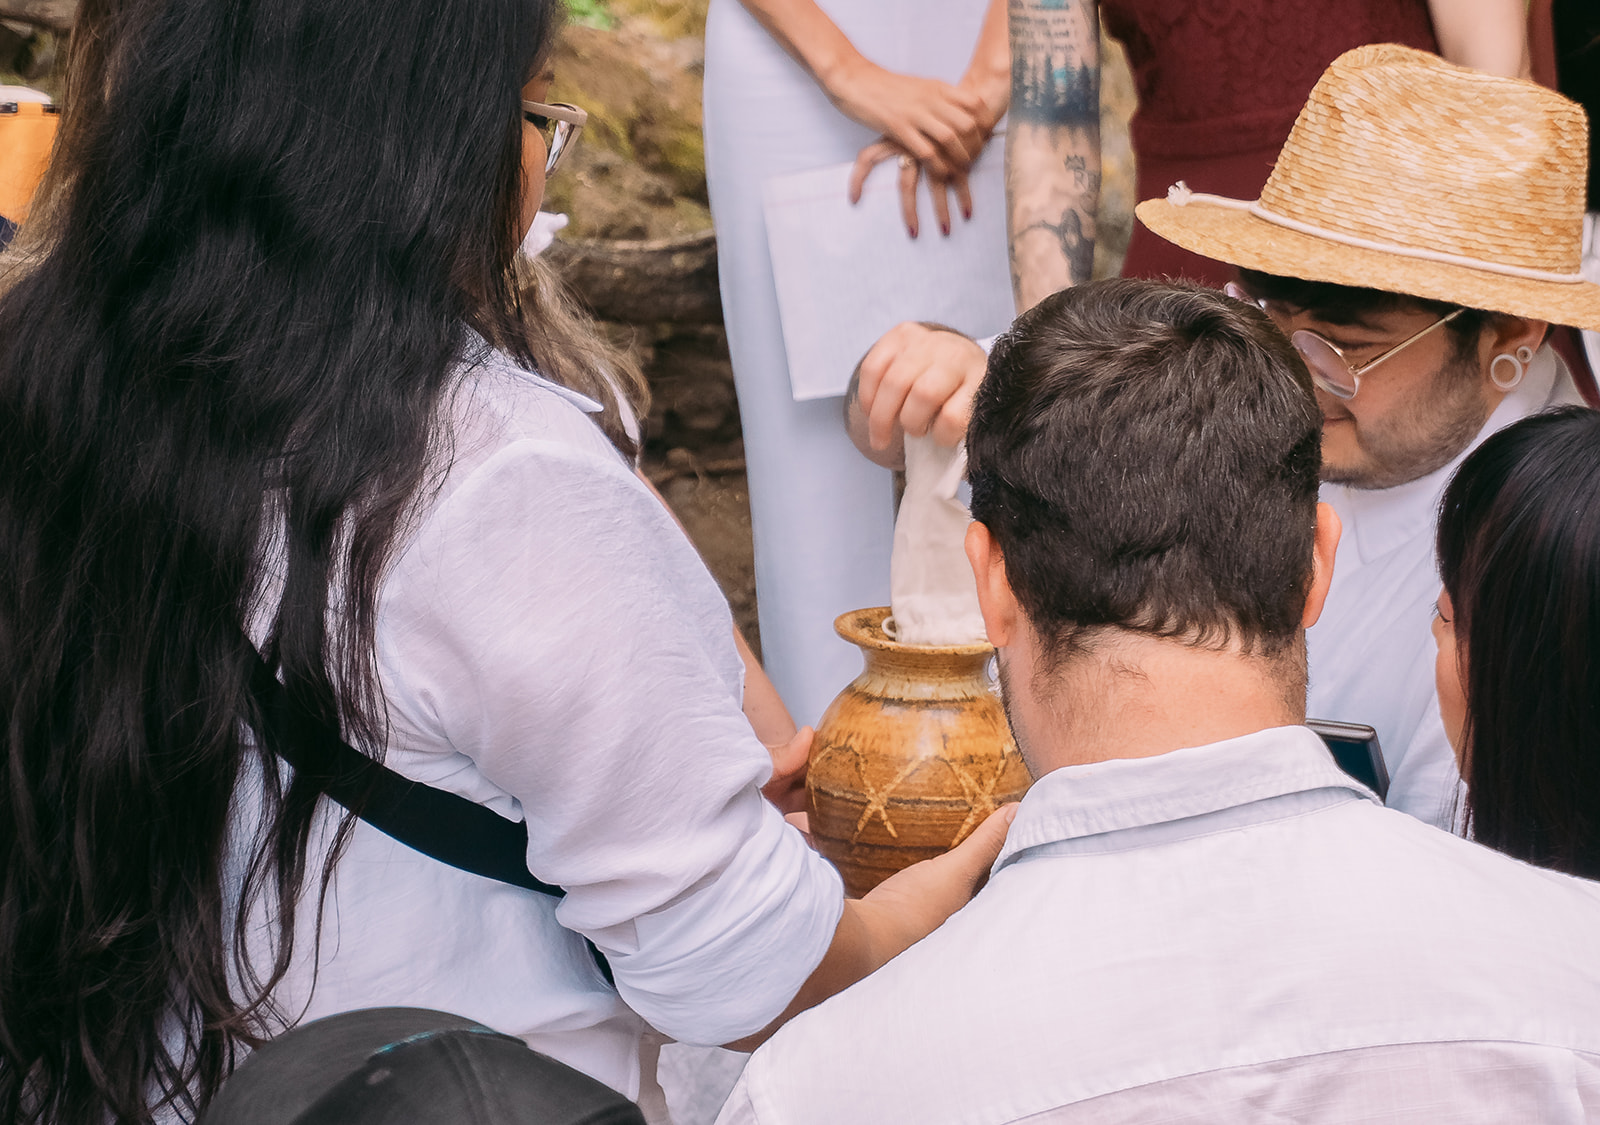 Guests from the small elopement pass around a small pot, ceremoniously pouring soil into it so that the brides can plant a seed for their elopement ceremony.